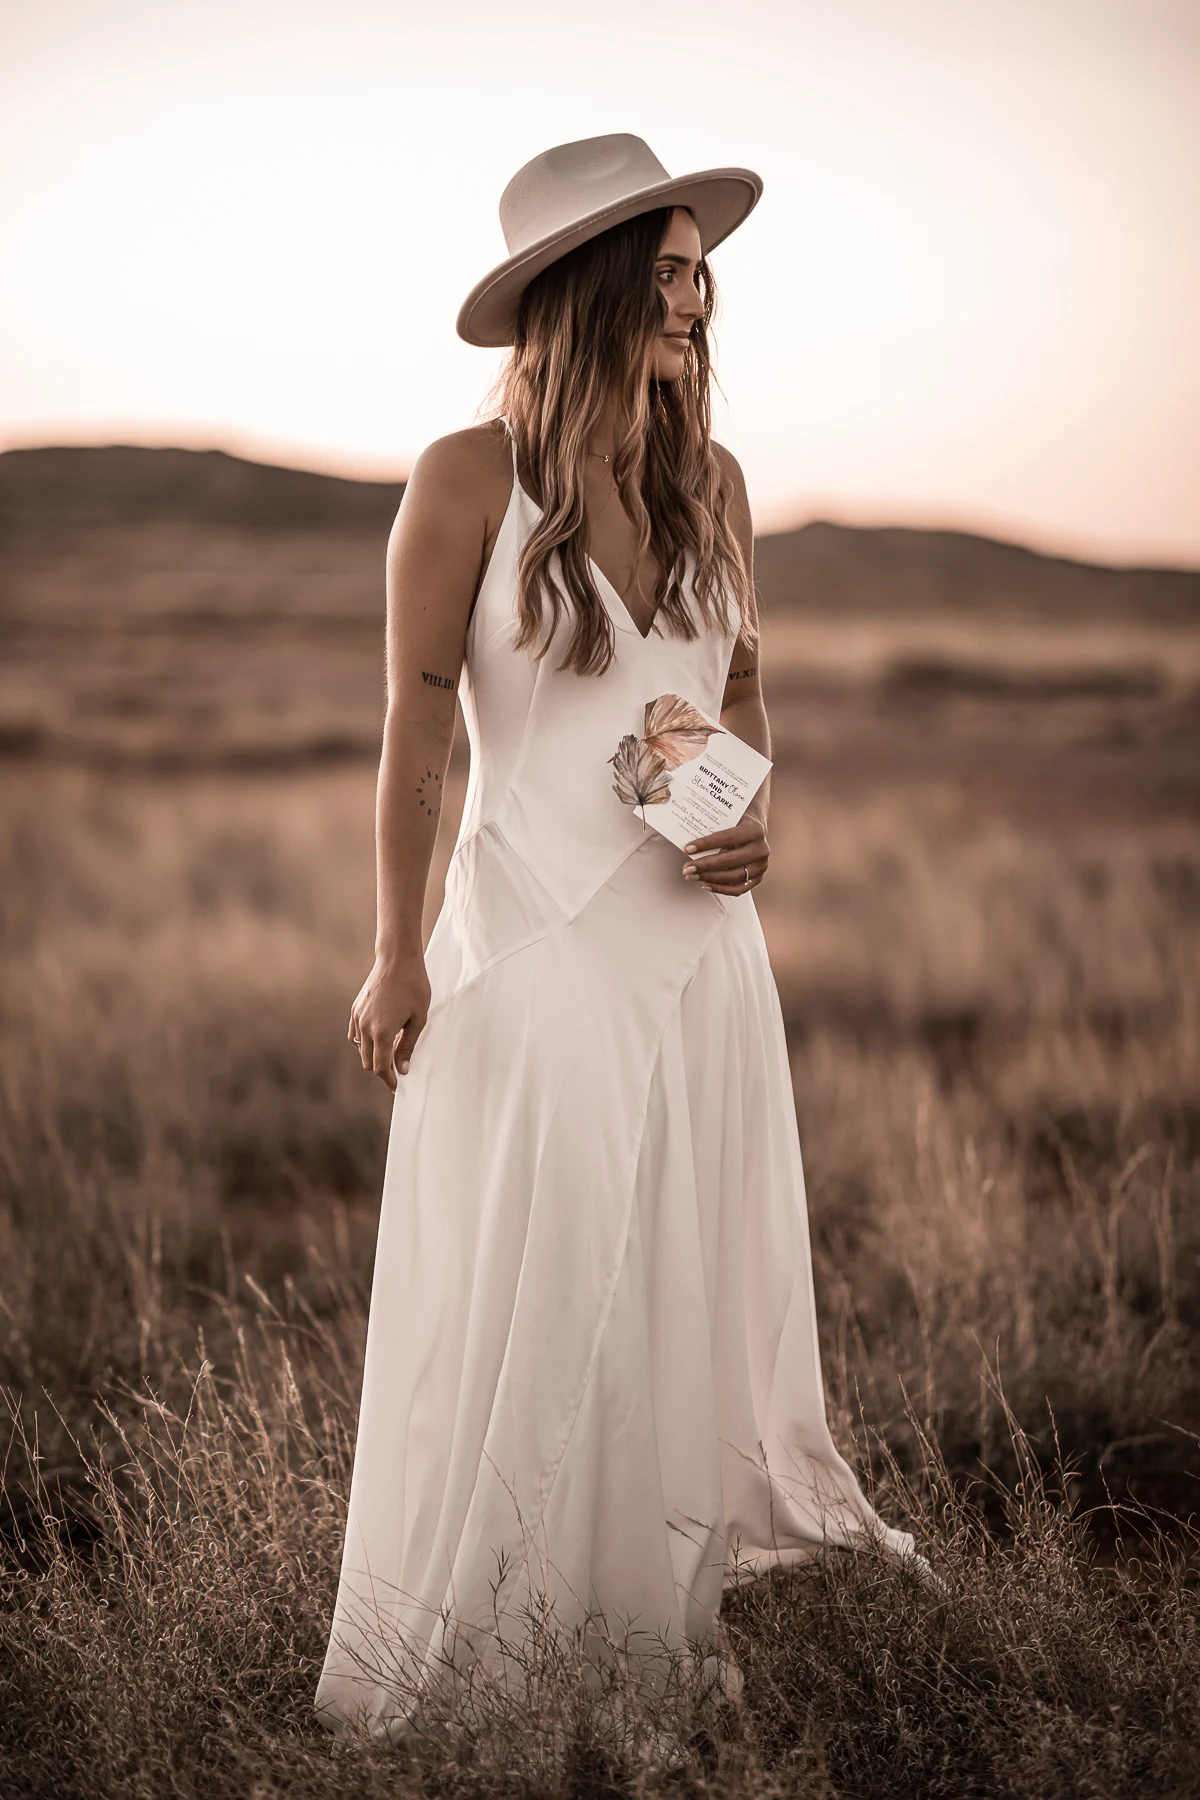 two unique photography and film weddings florals styling karratha wa